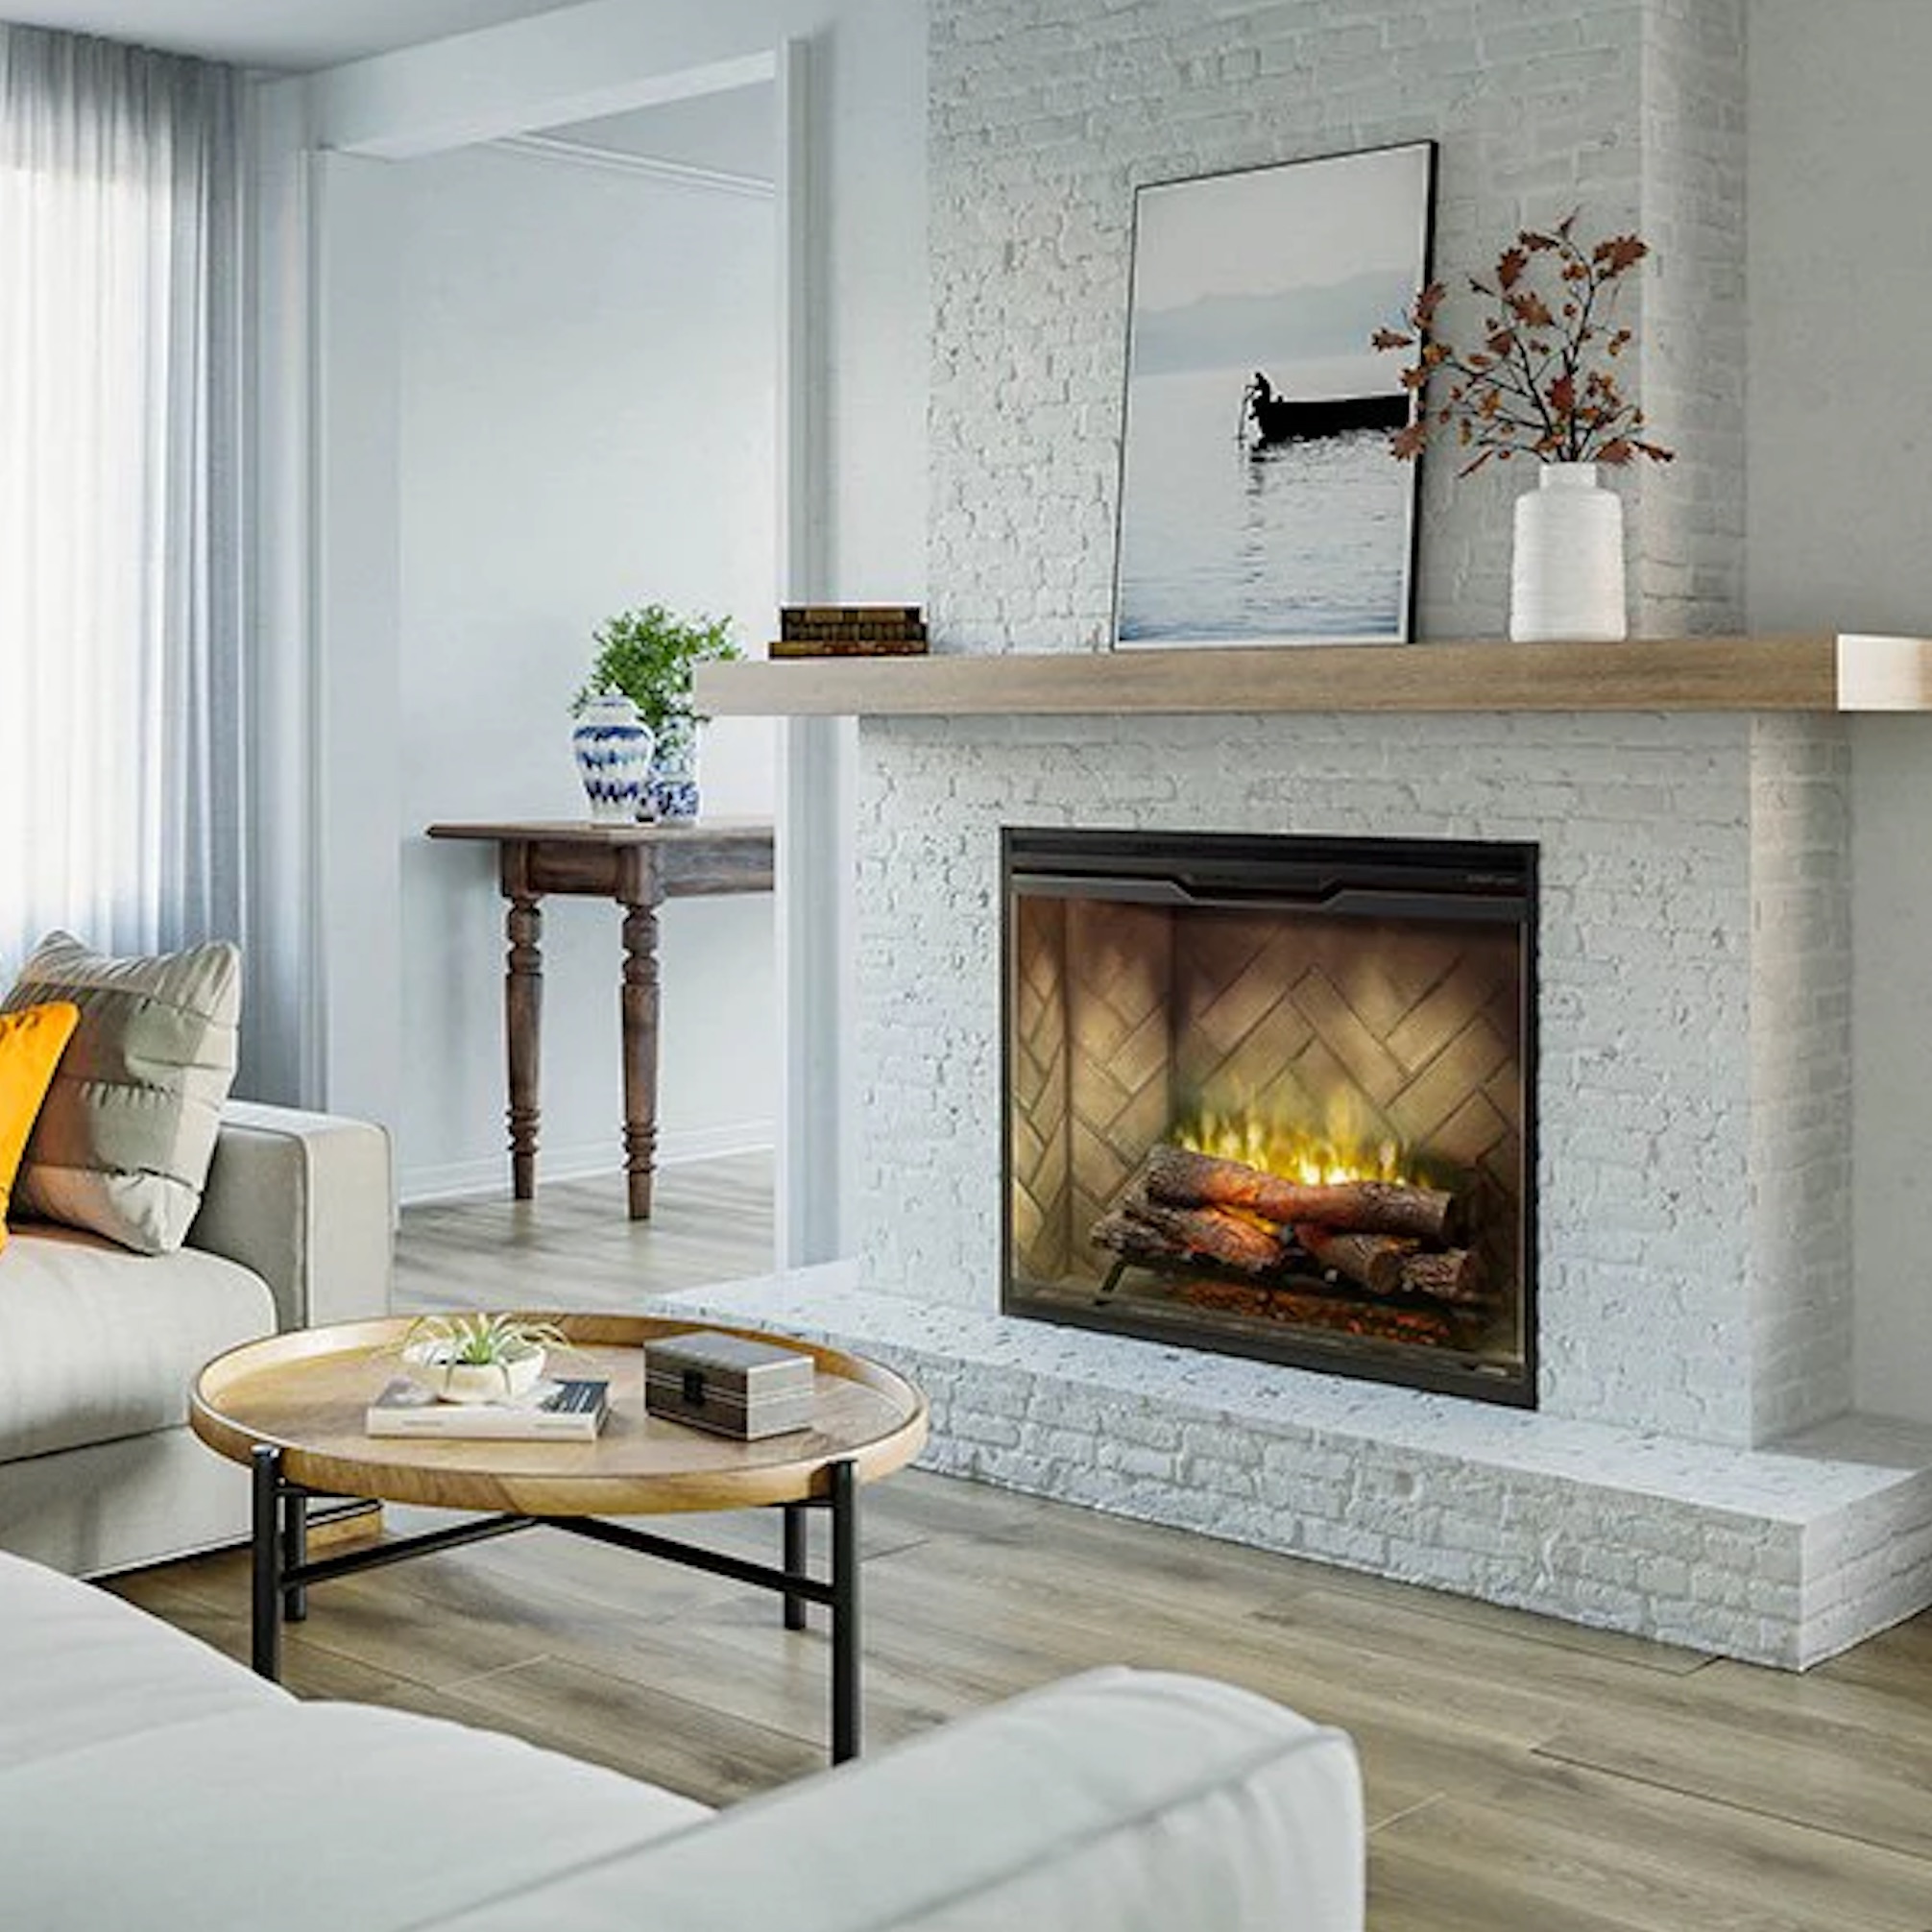 dimplex revillusion electric fireplace wit white brick surround and oak mantle in living room